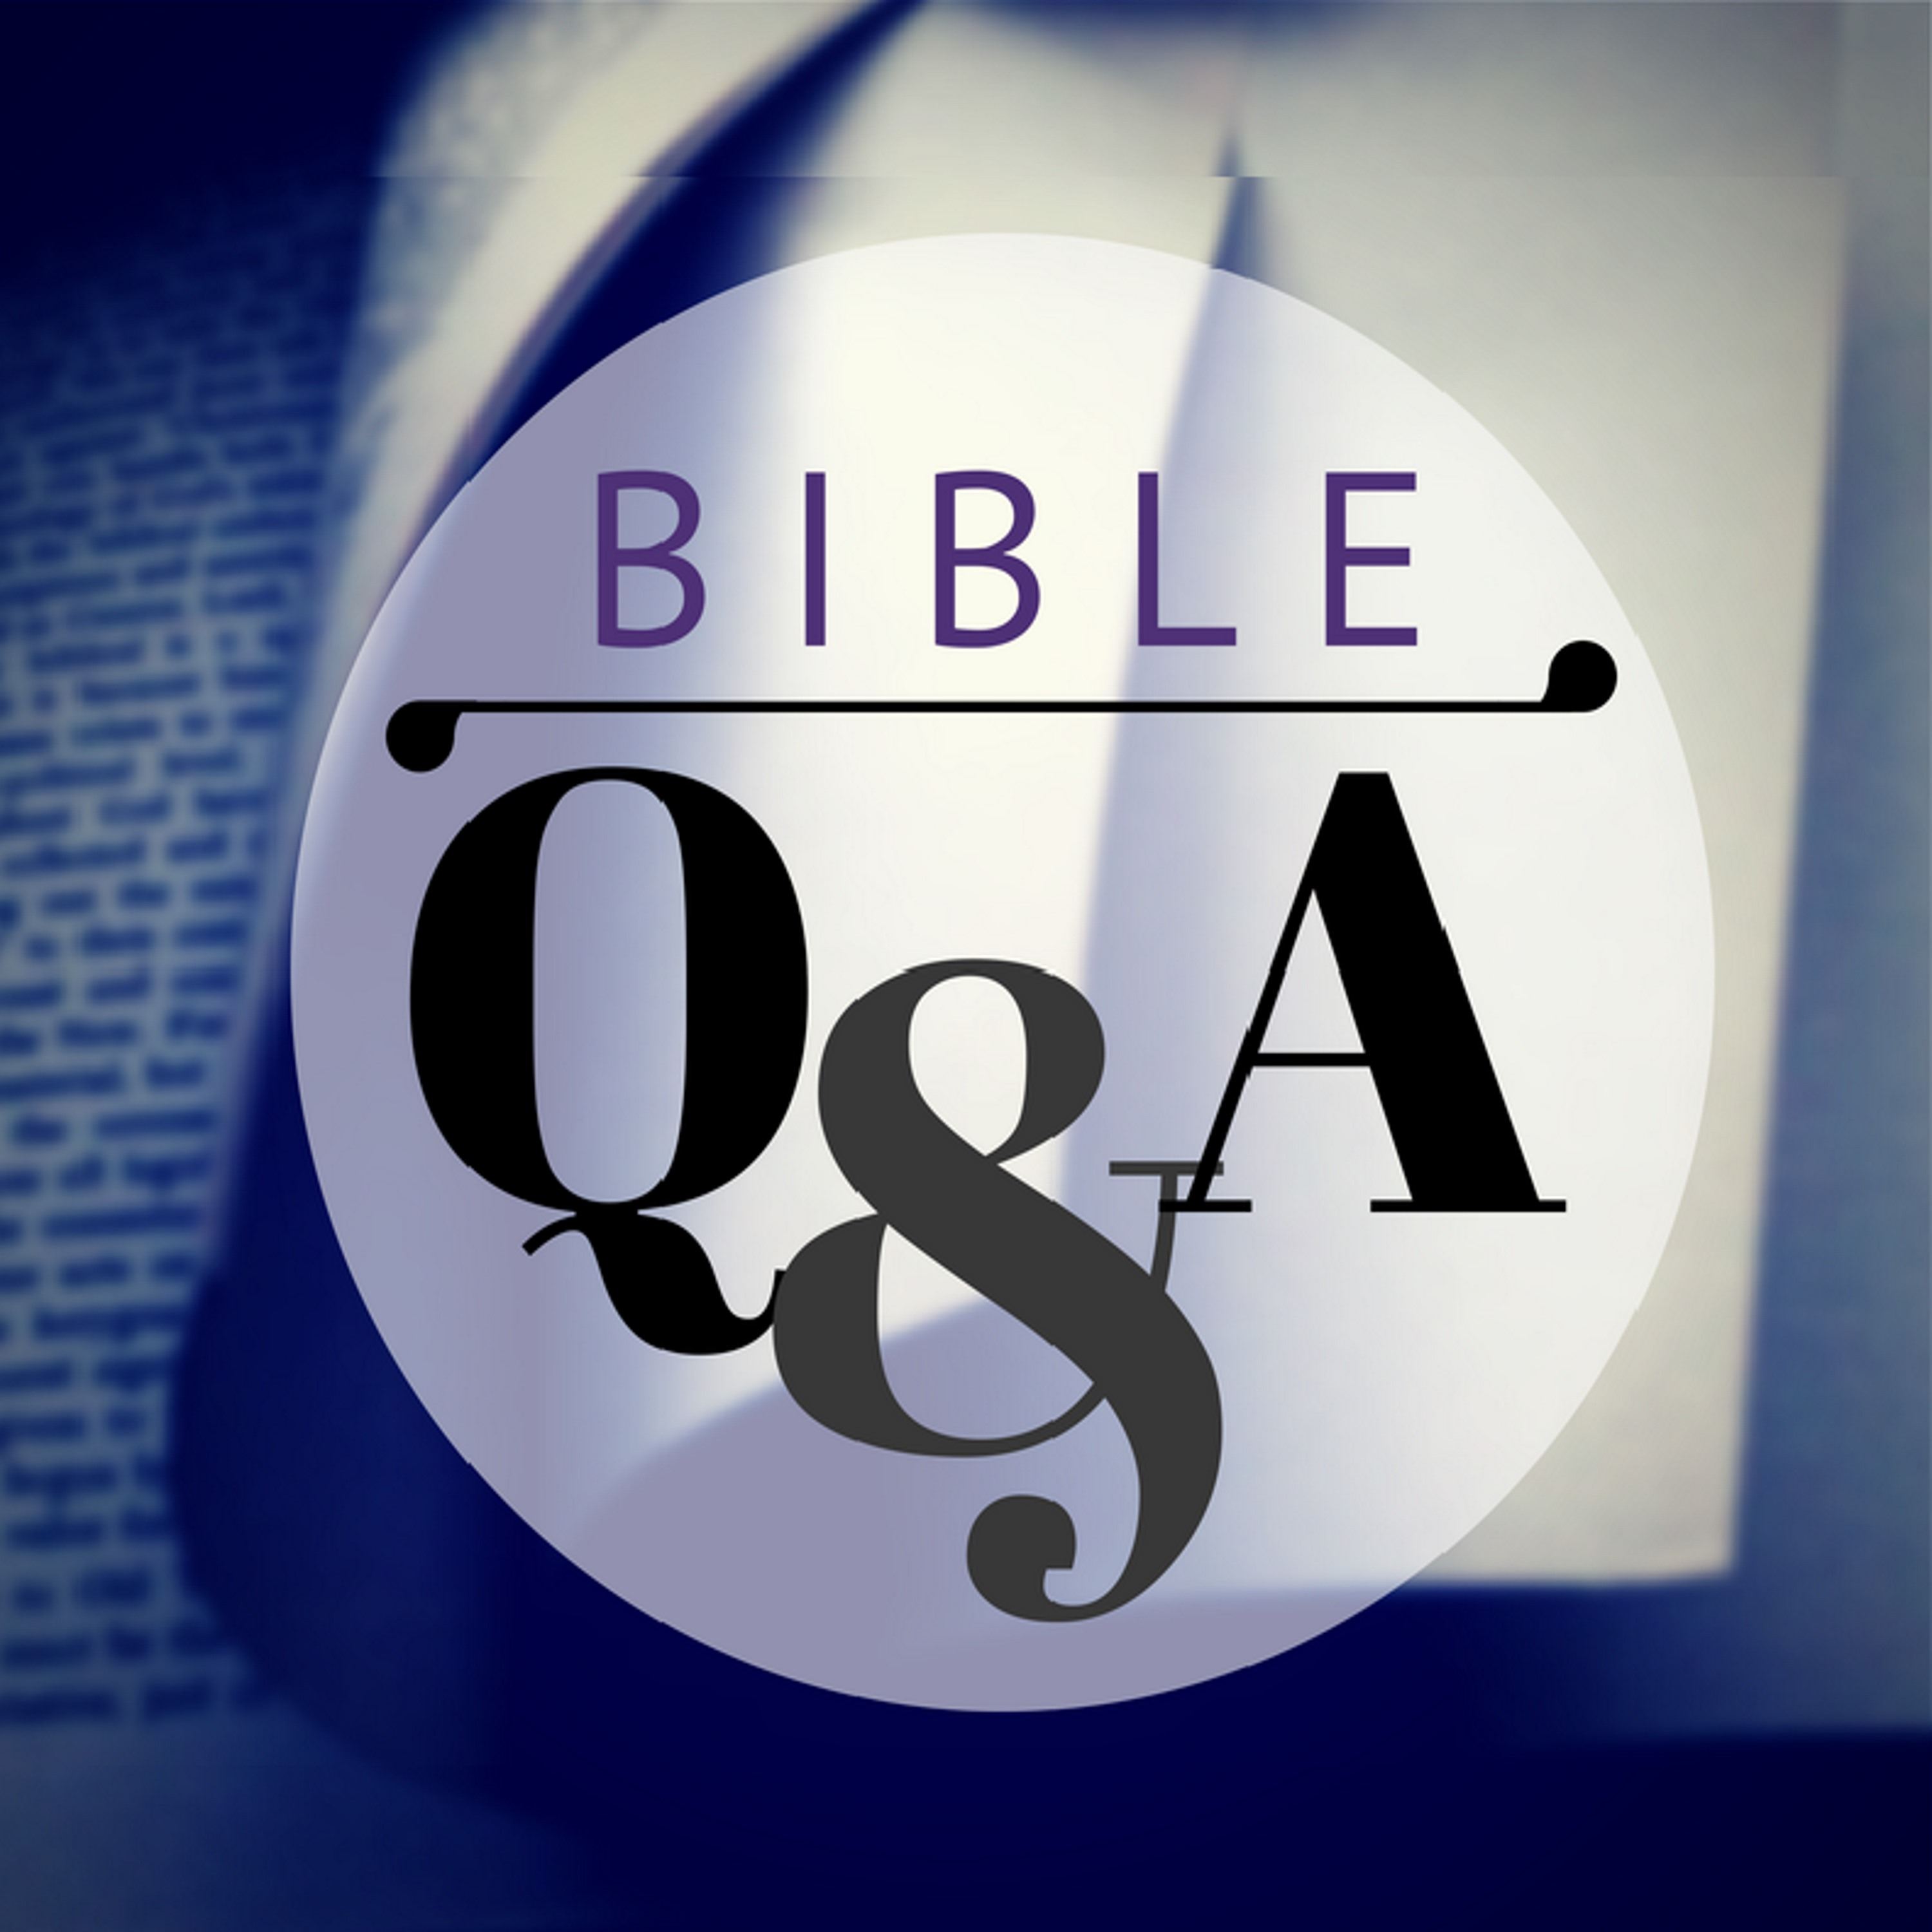 Can My Name Be Blotted Out of the Book of Life? (Ask a Bible Teacher)